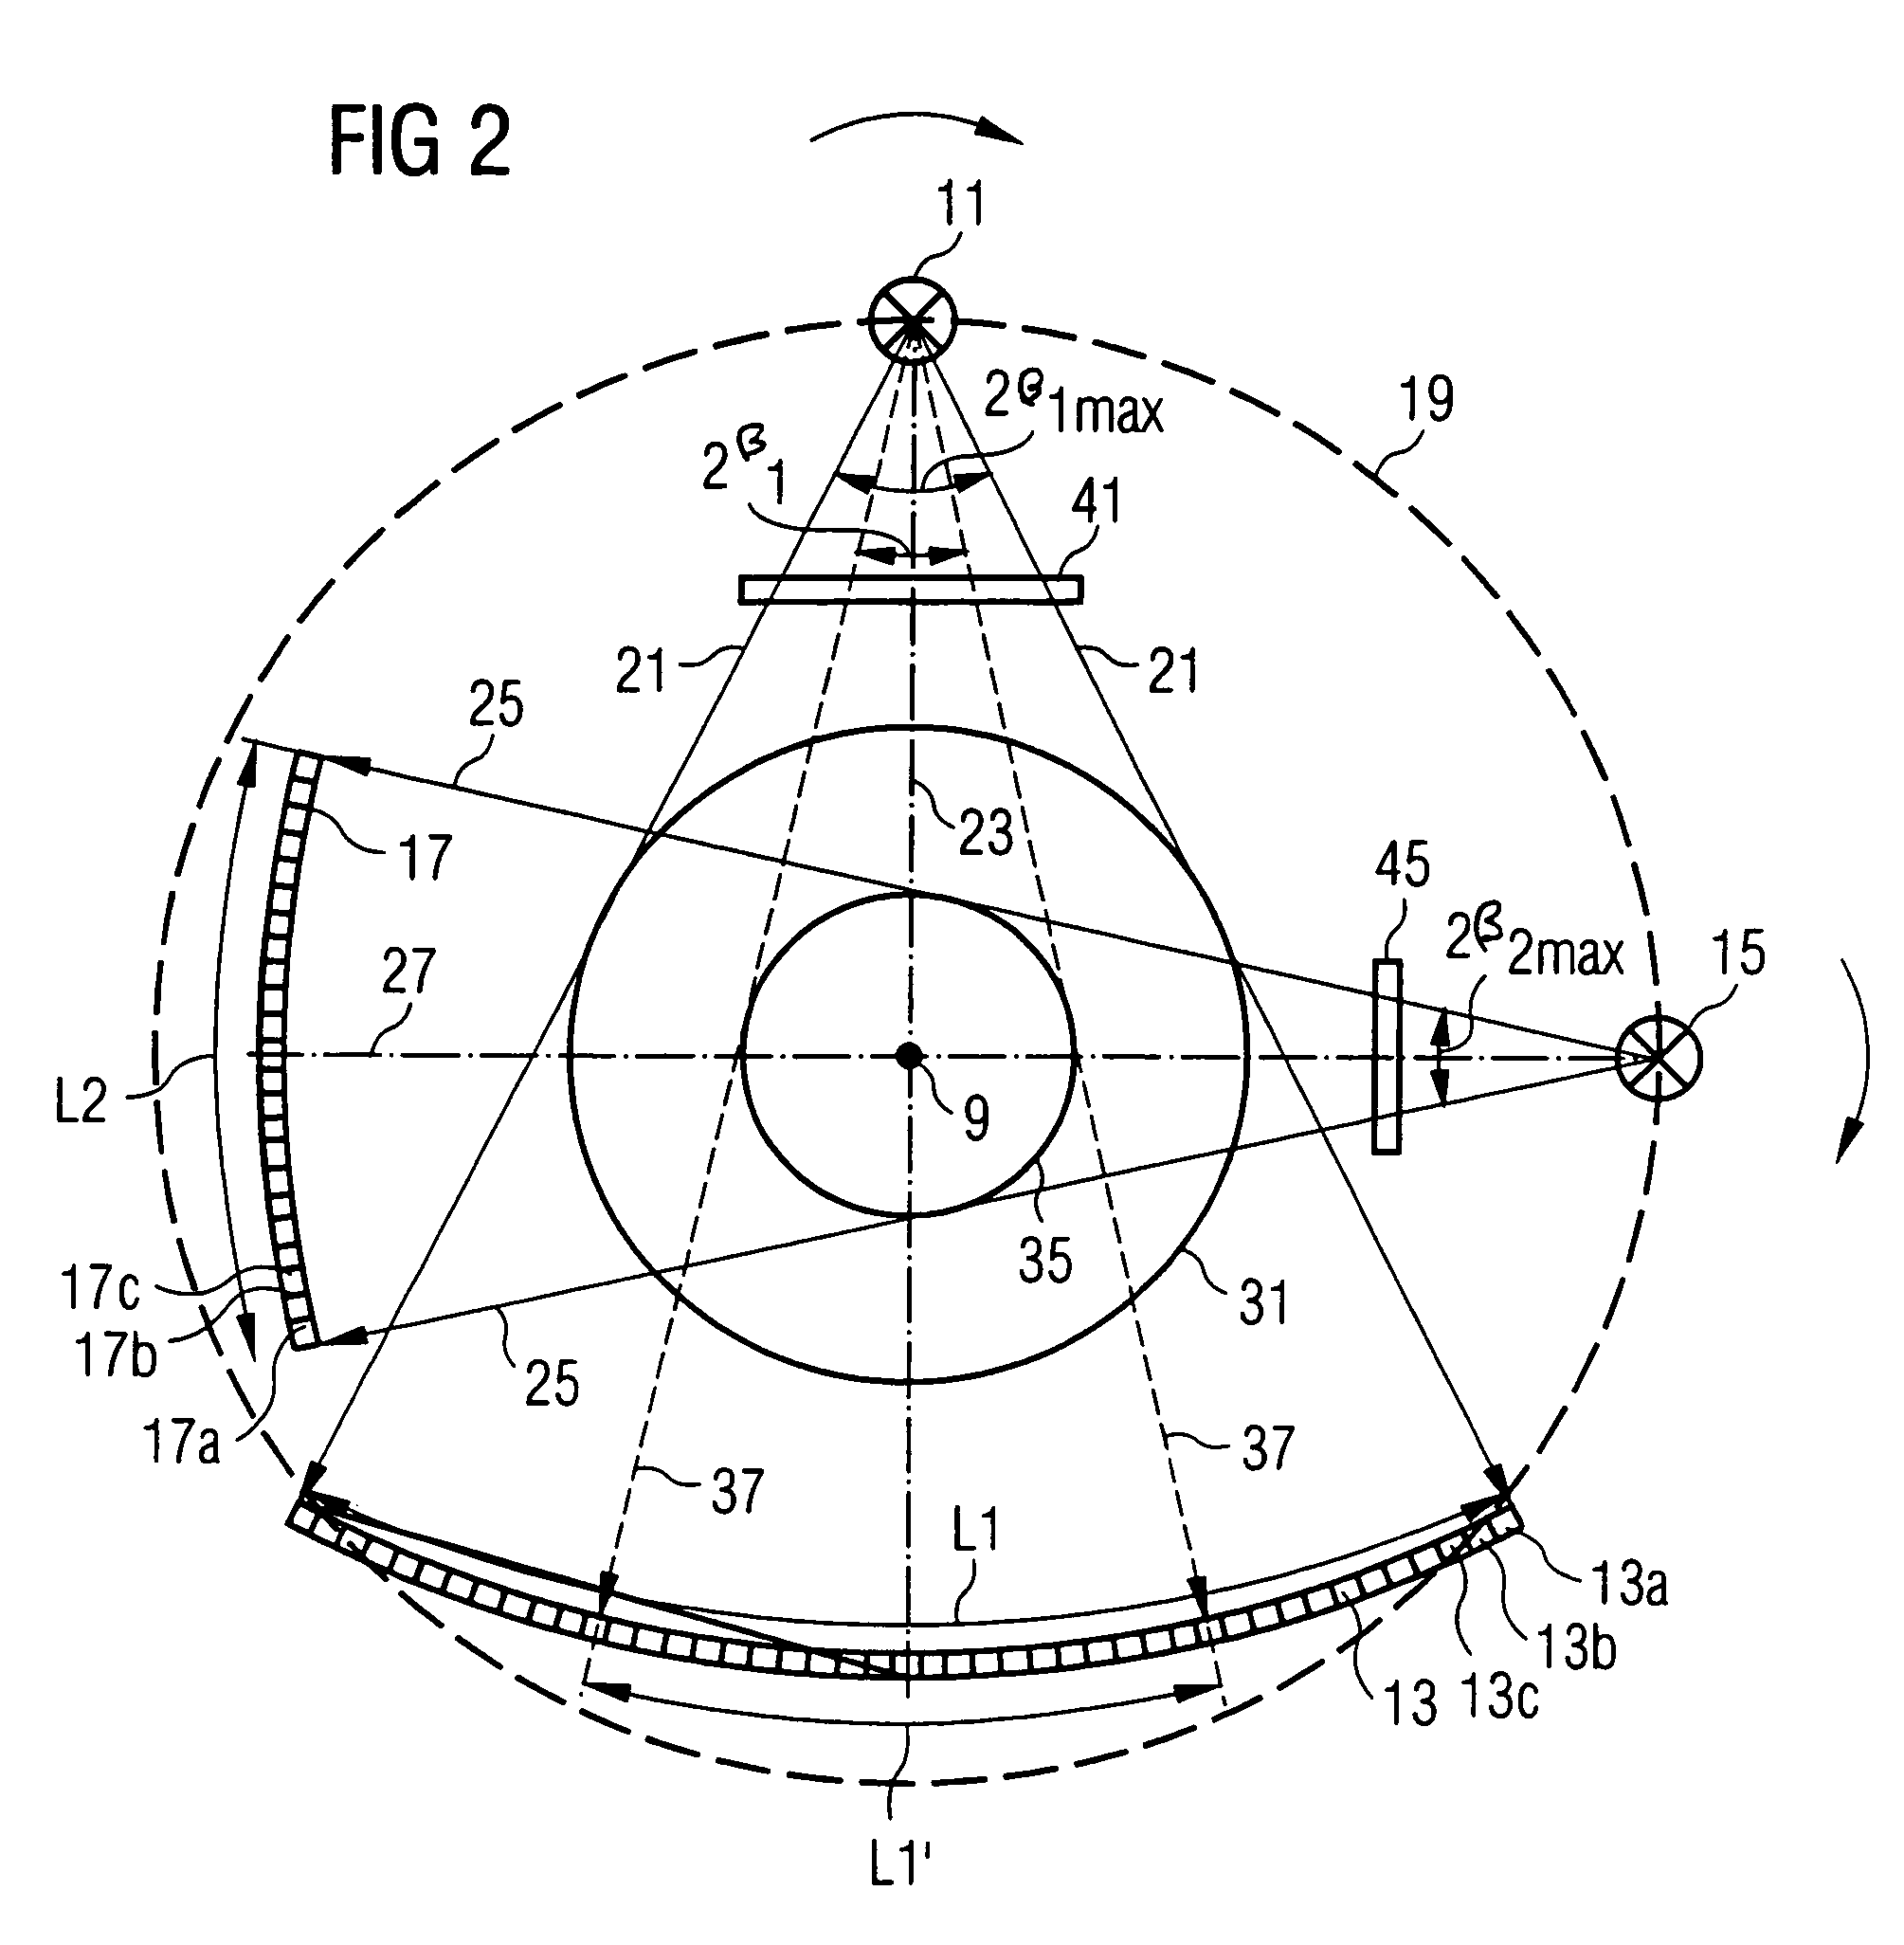 Imaging tomography apparatus with at least two radiator-detector combinations